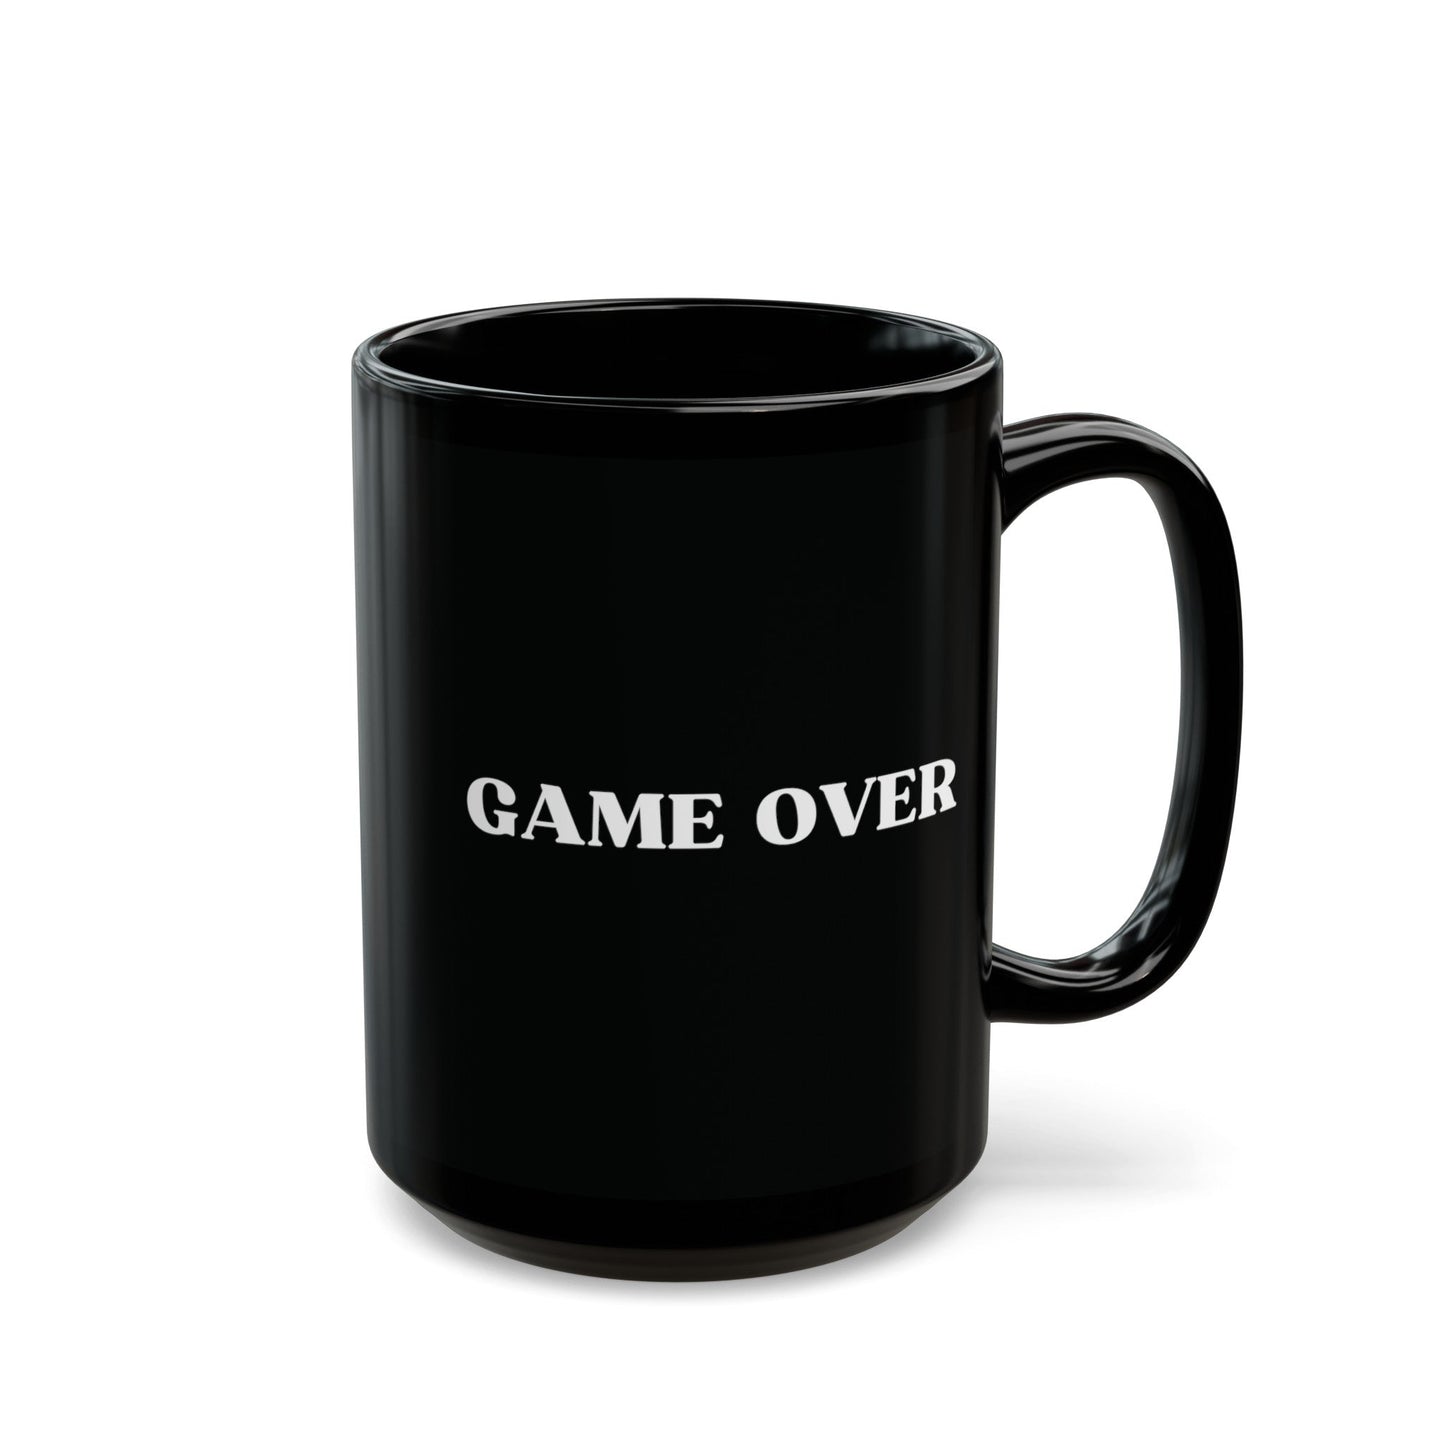 Game Over | Funny Gamer Inspired Cup, Video Game Coffee Cup, Office Or Geek Gift | Black Coffee Mug (11/15oz) - Moikas